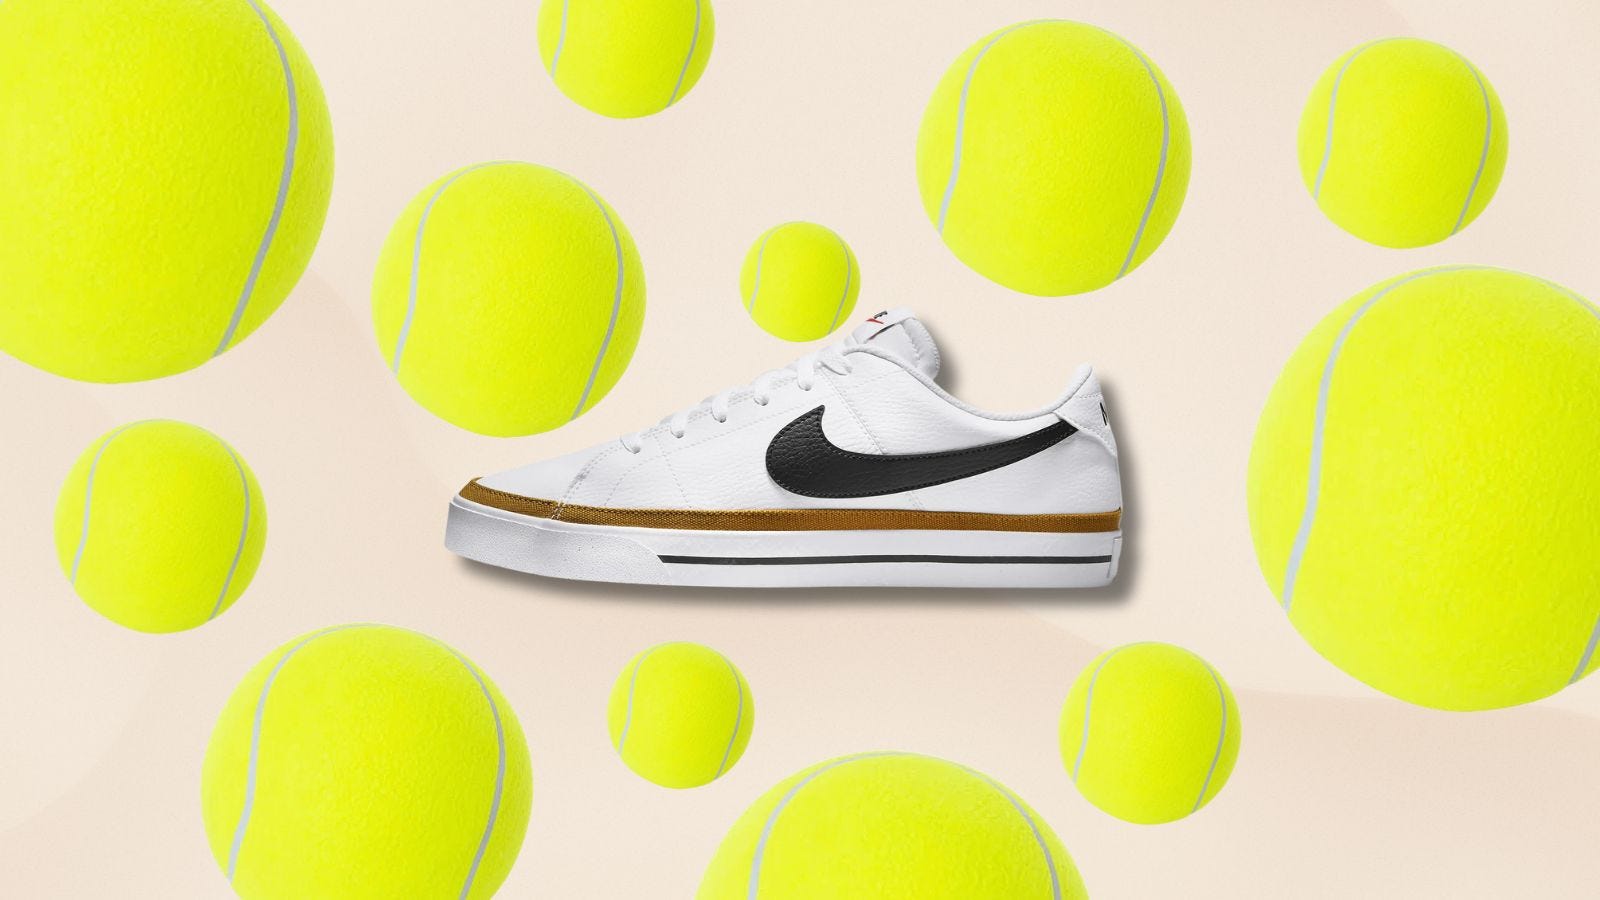 image of a men's Nike tennis sneaker against a background of tennis ball in assorted sizes